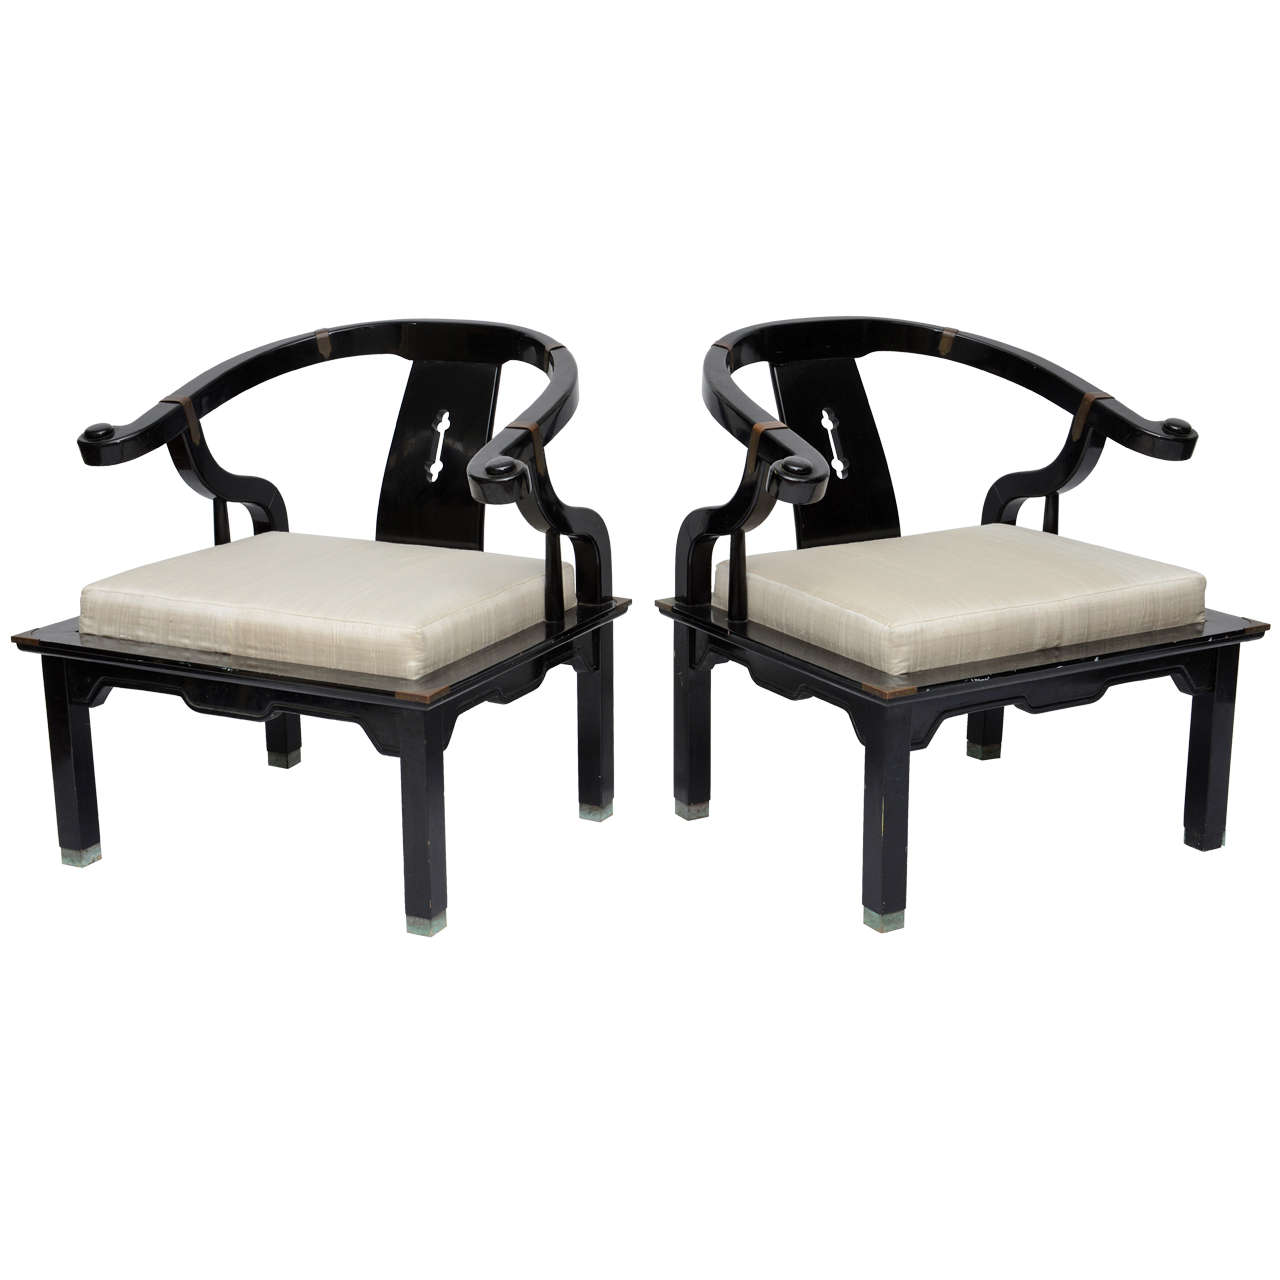 Pair of Chinoiserie Style James Mont Chairs with Dupioni Silk Cushions 1960